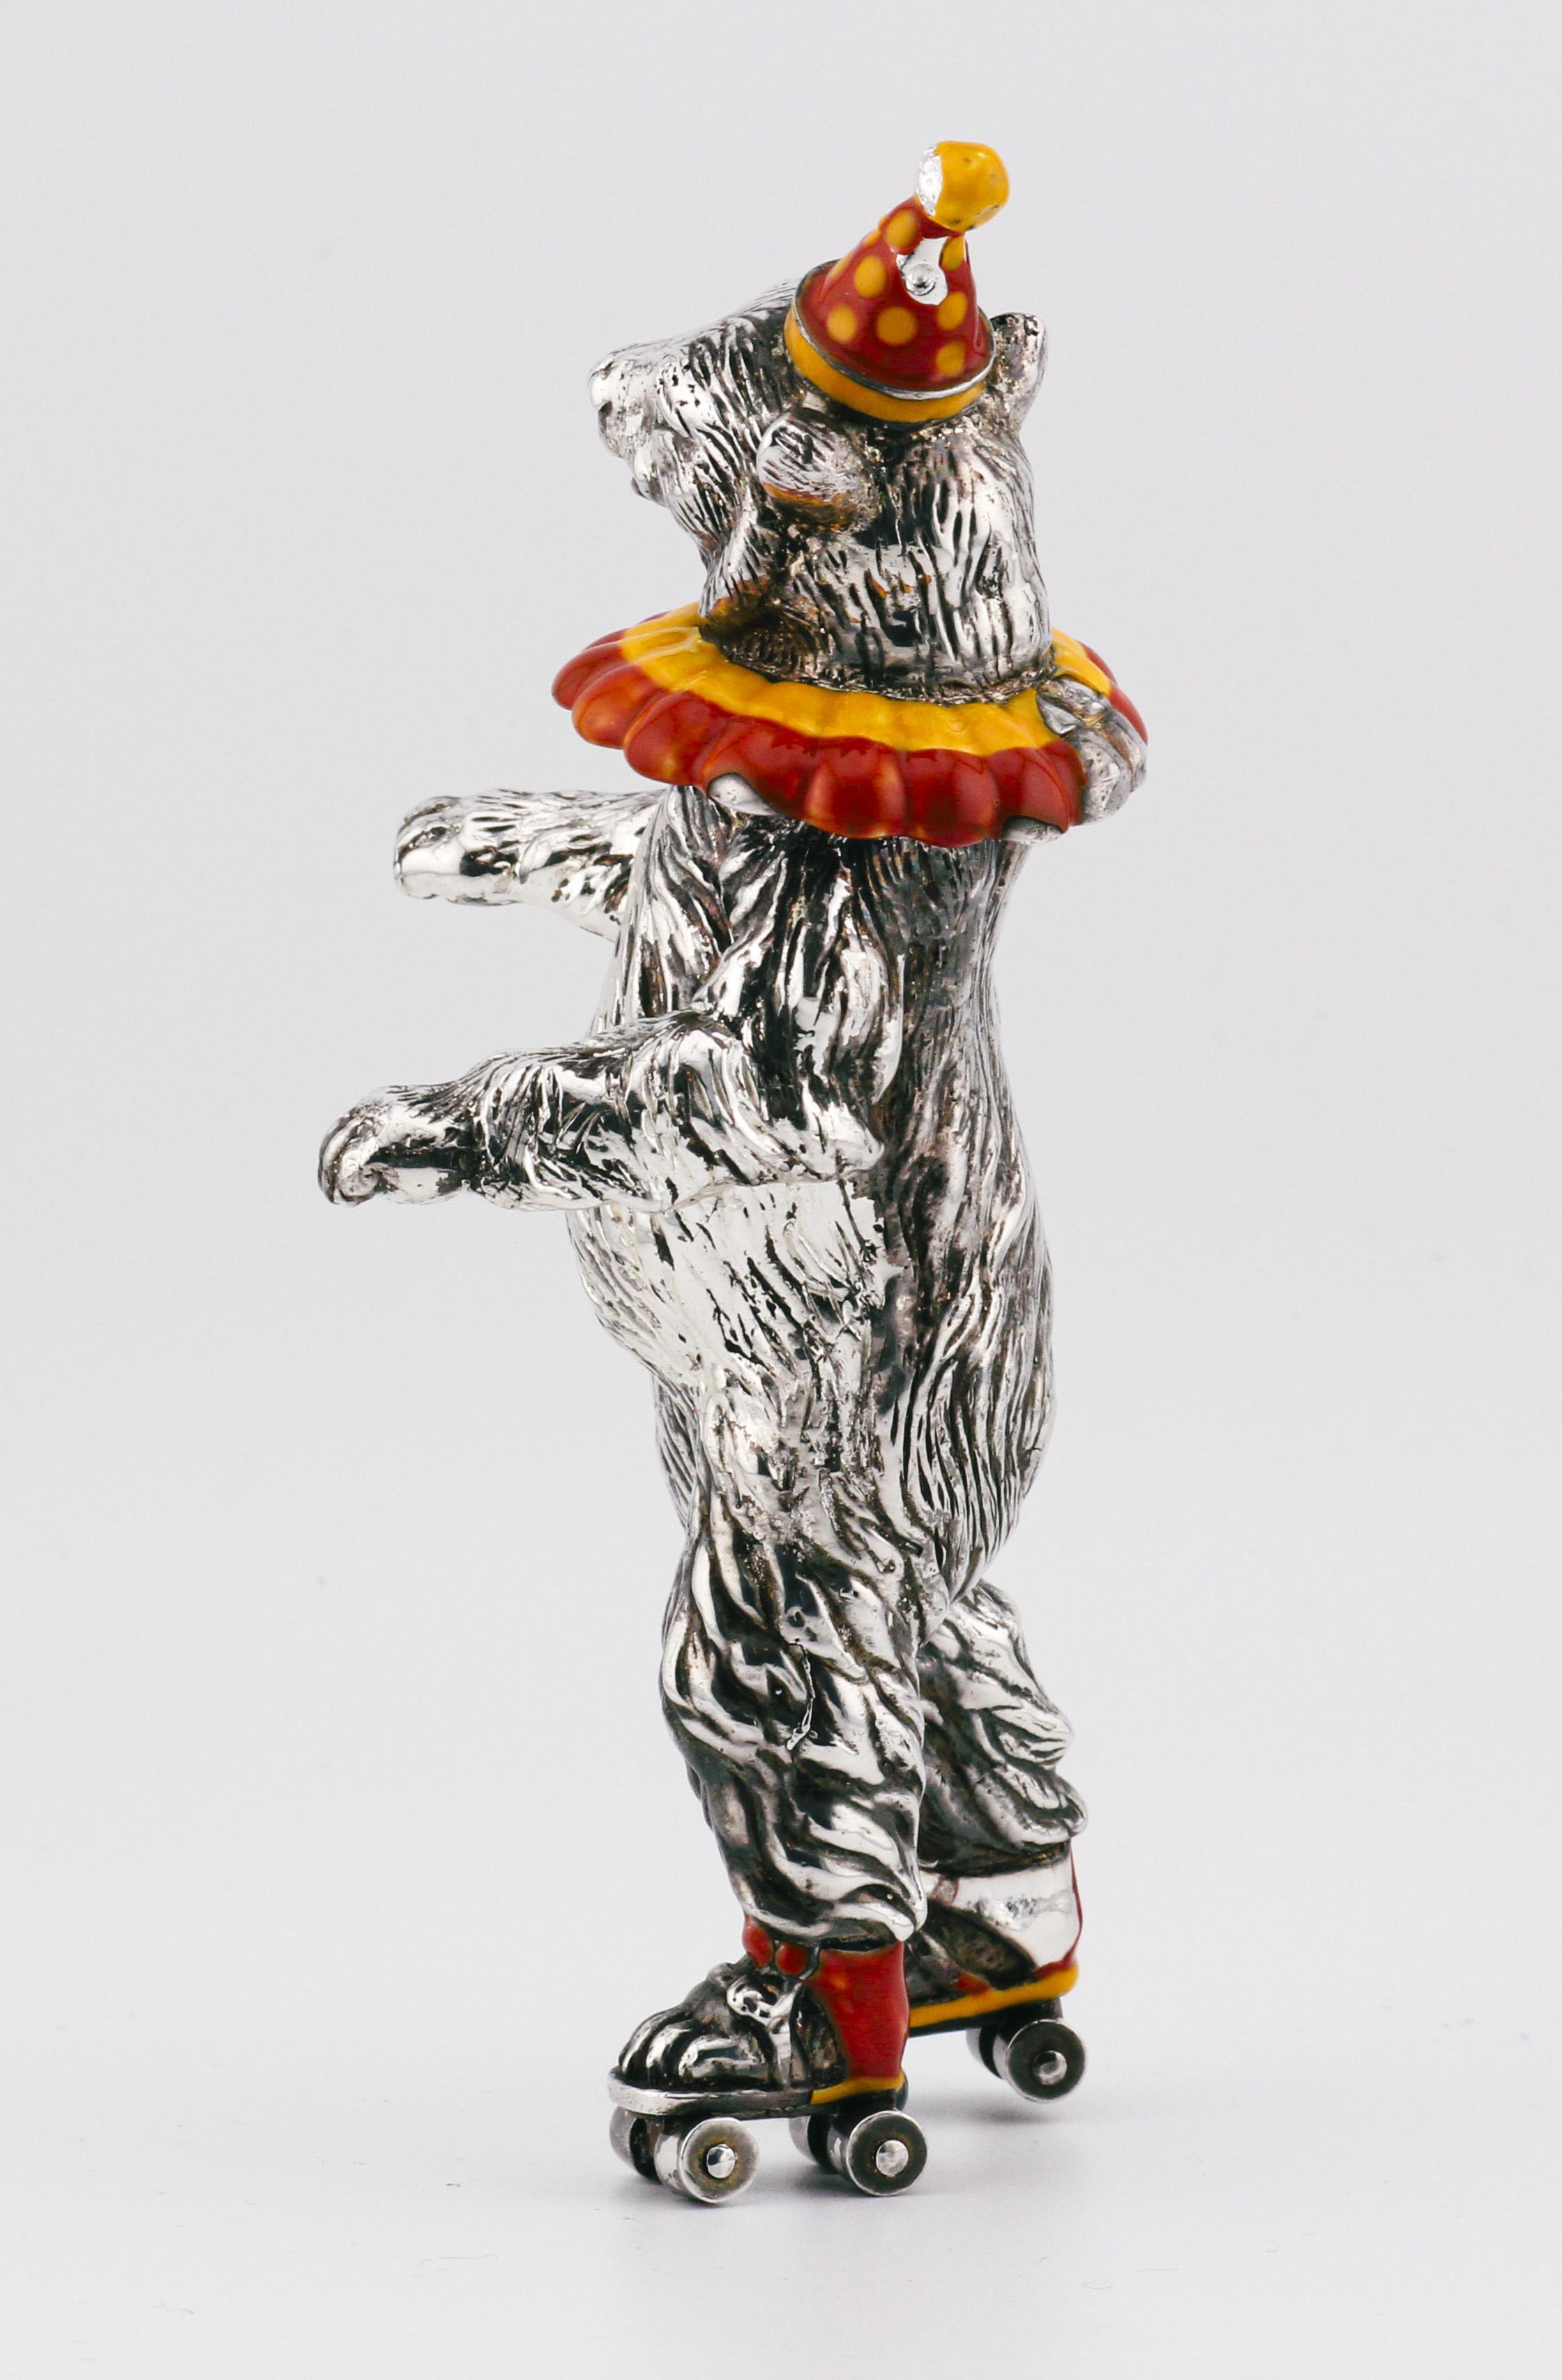 Tiffany and Co. Sterling Silver Enamel Circus Bear on Roller Skates Figurine In Good Condition For Sale In Bellmore, NY